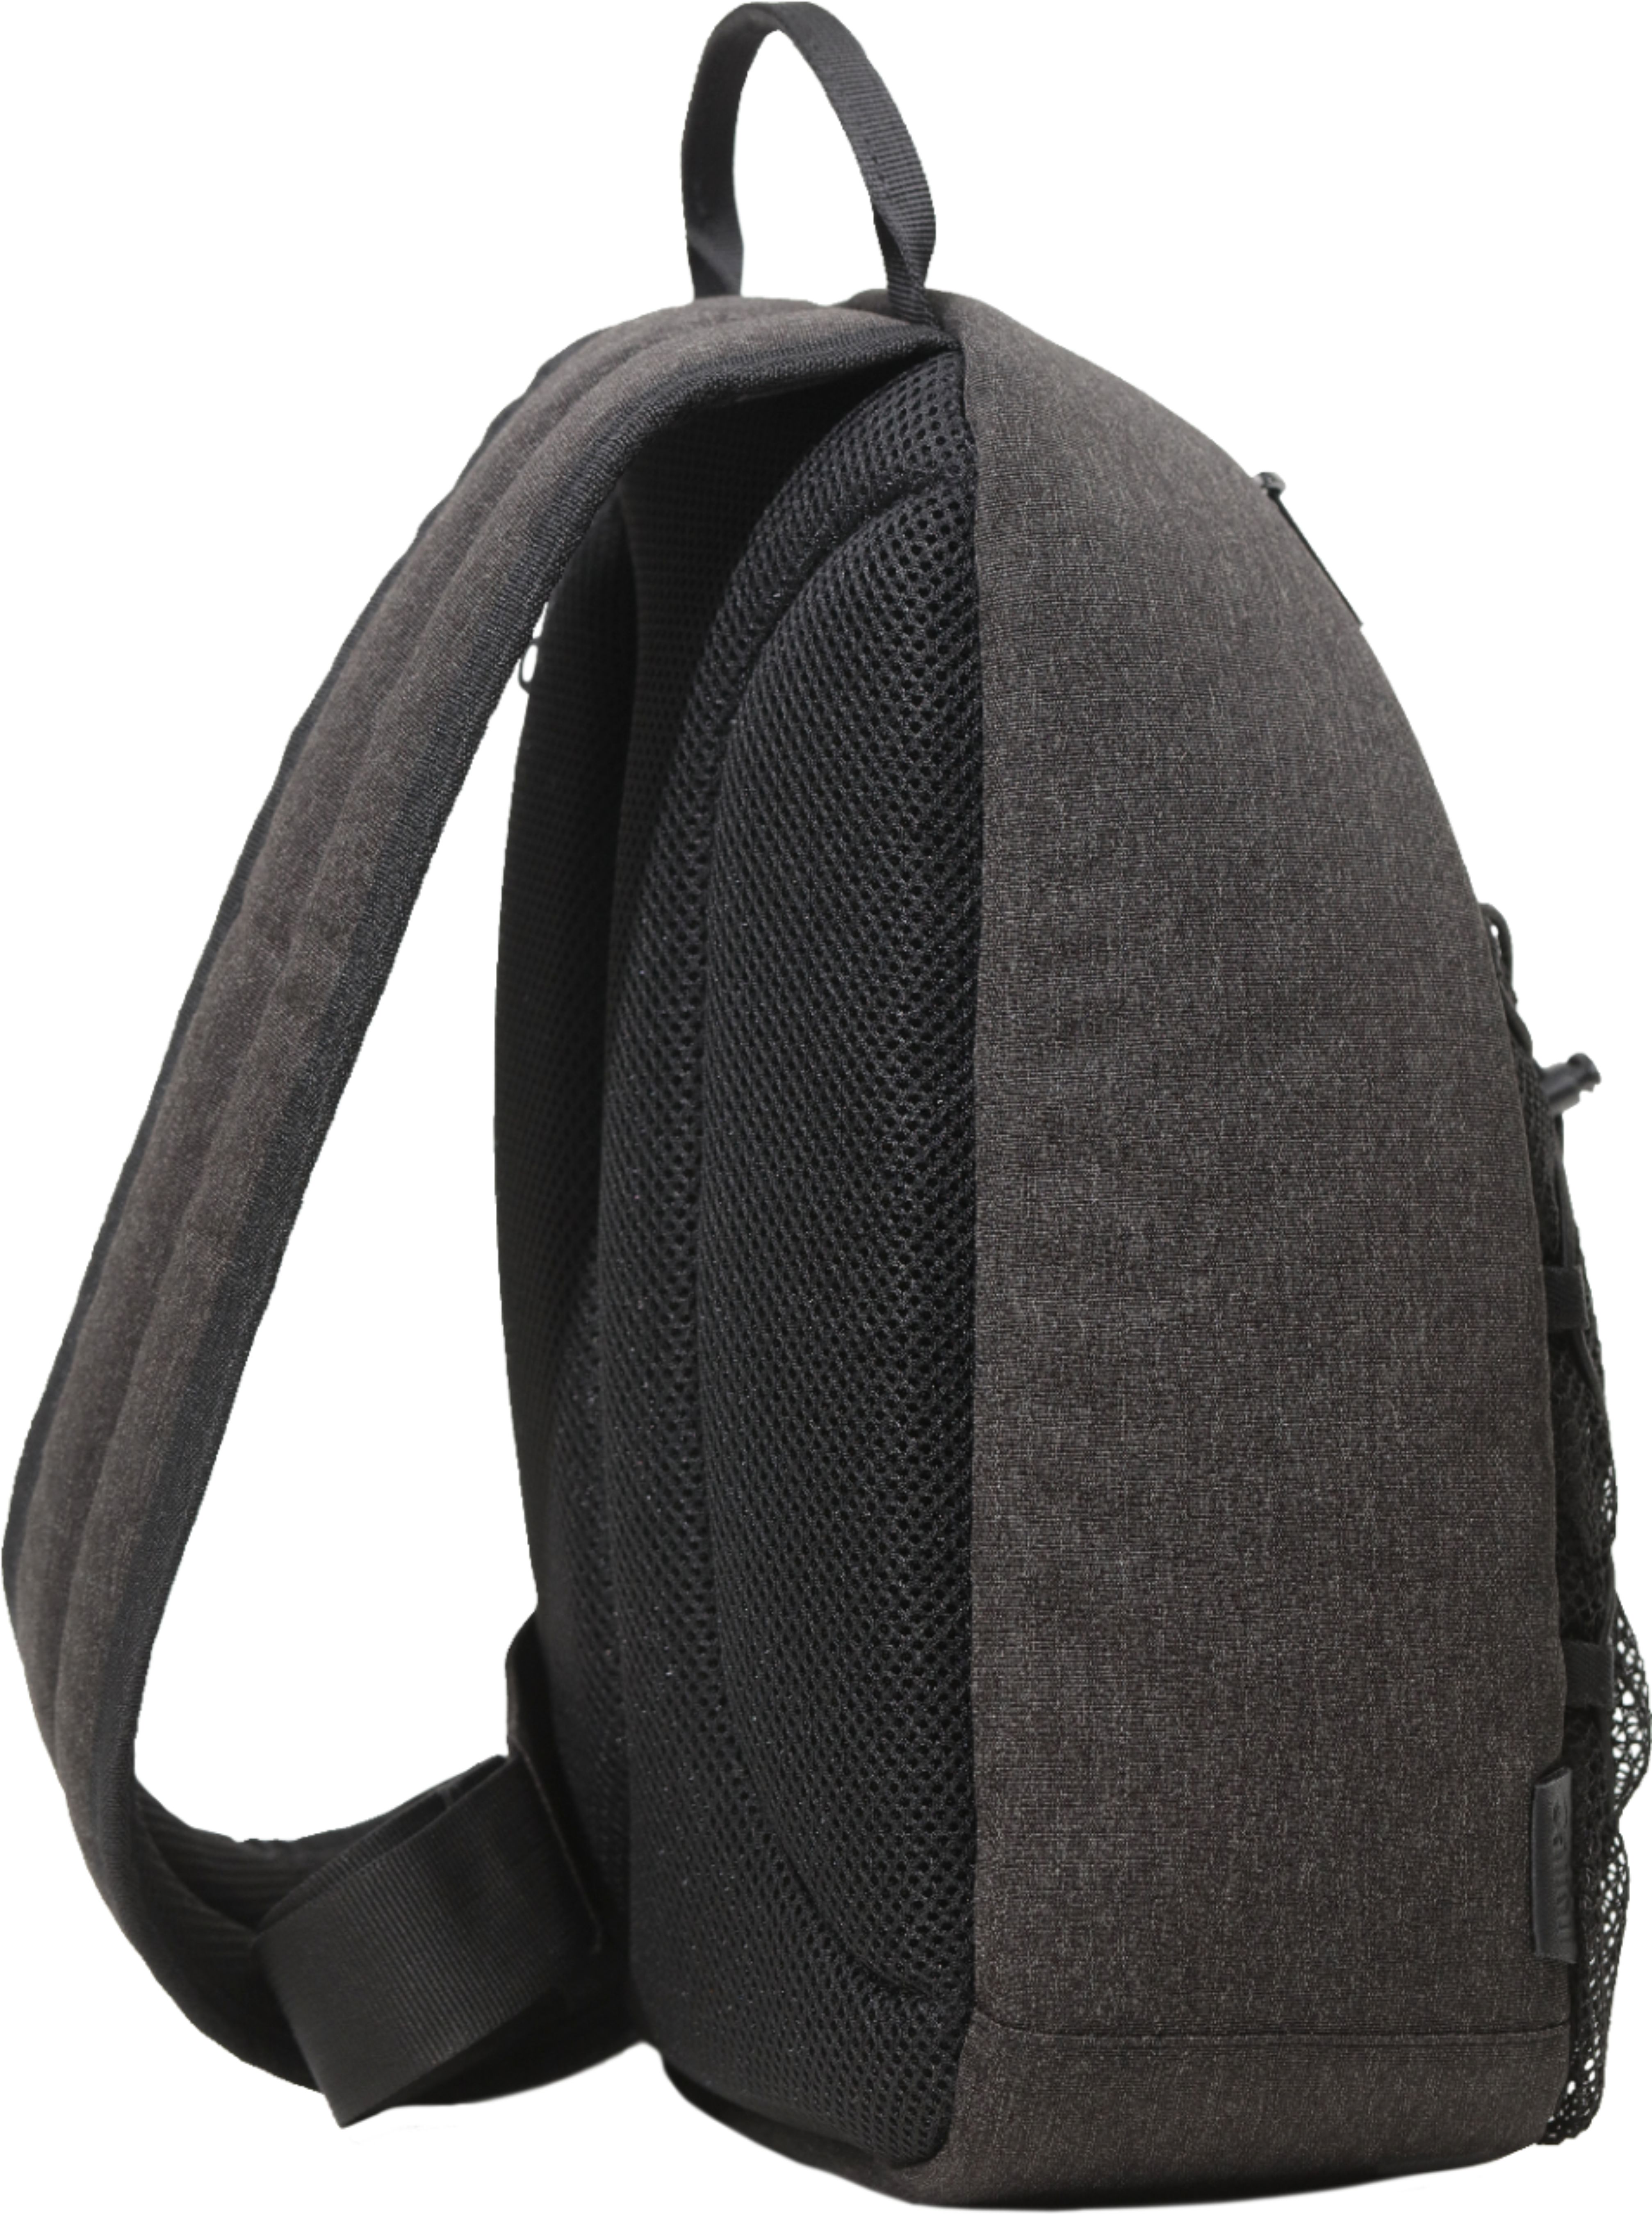 Left View: Canon - Sling Backpack EDC-10 - Dark Heather Gray